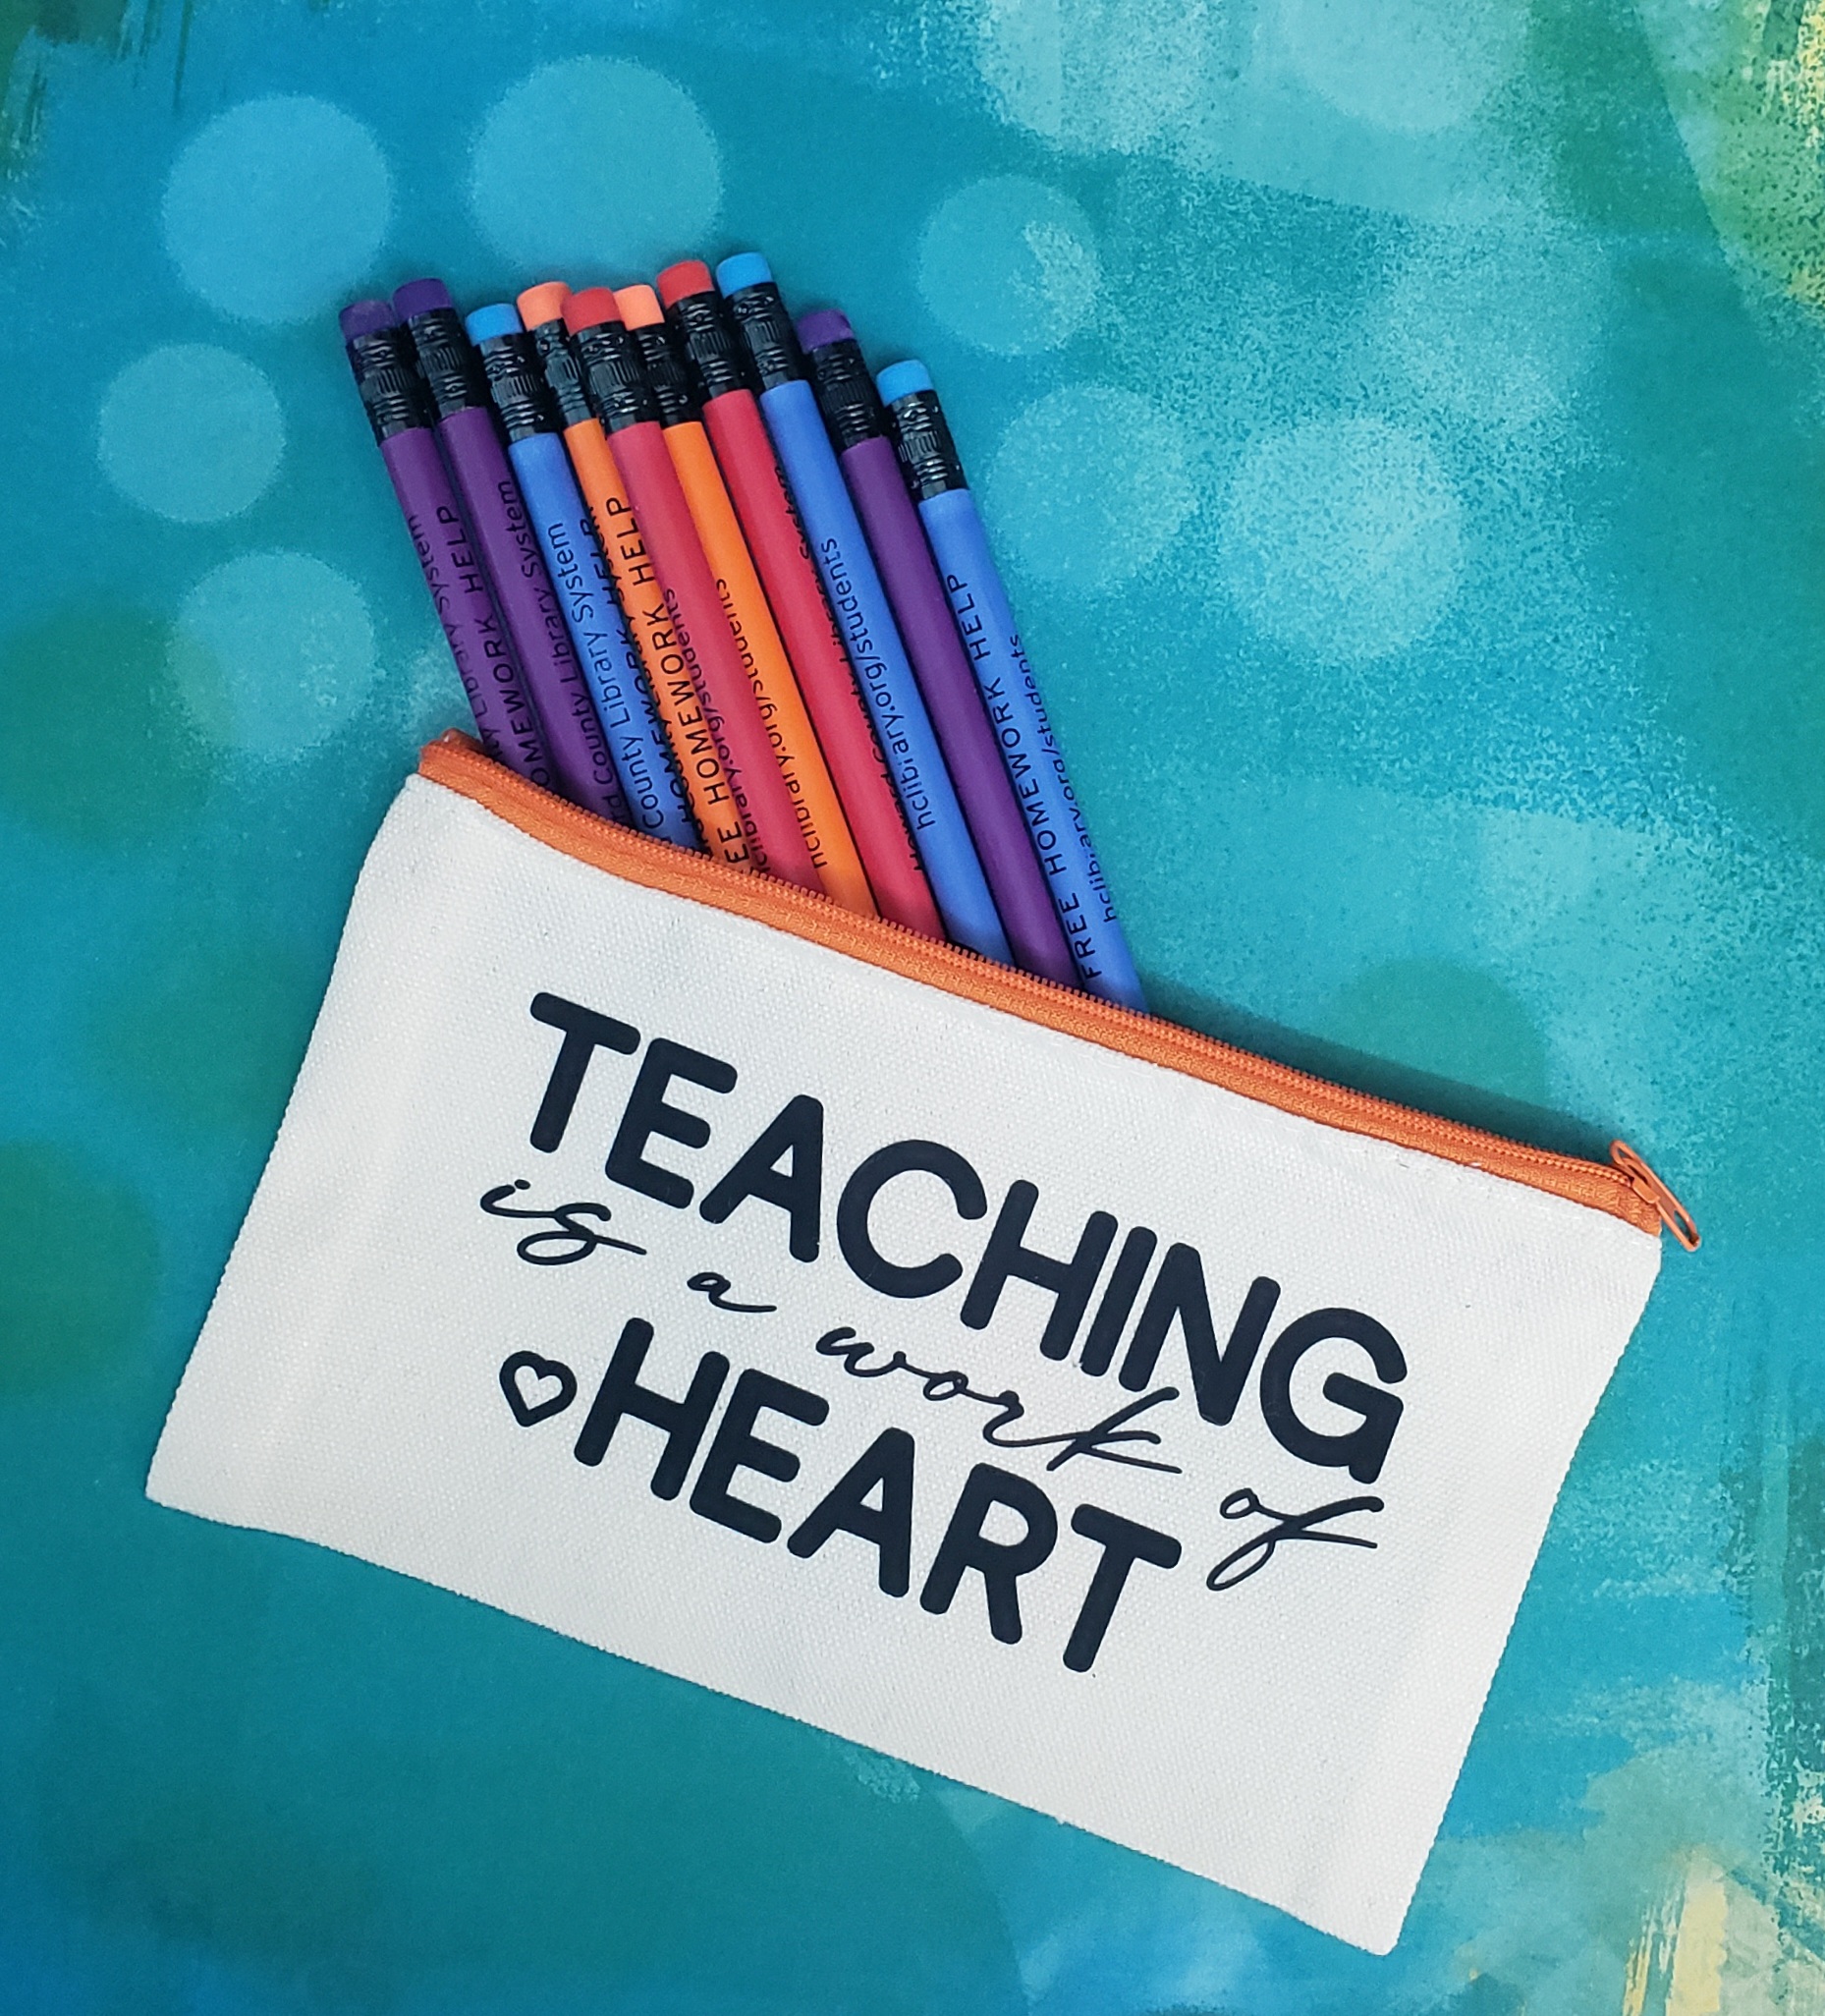 Canvas pencil bag with pencils and saying "Teaching is a work of heart" 